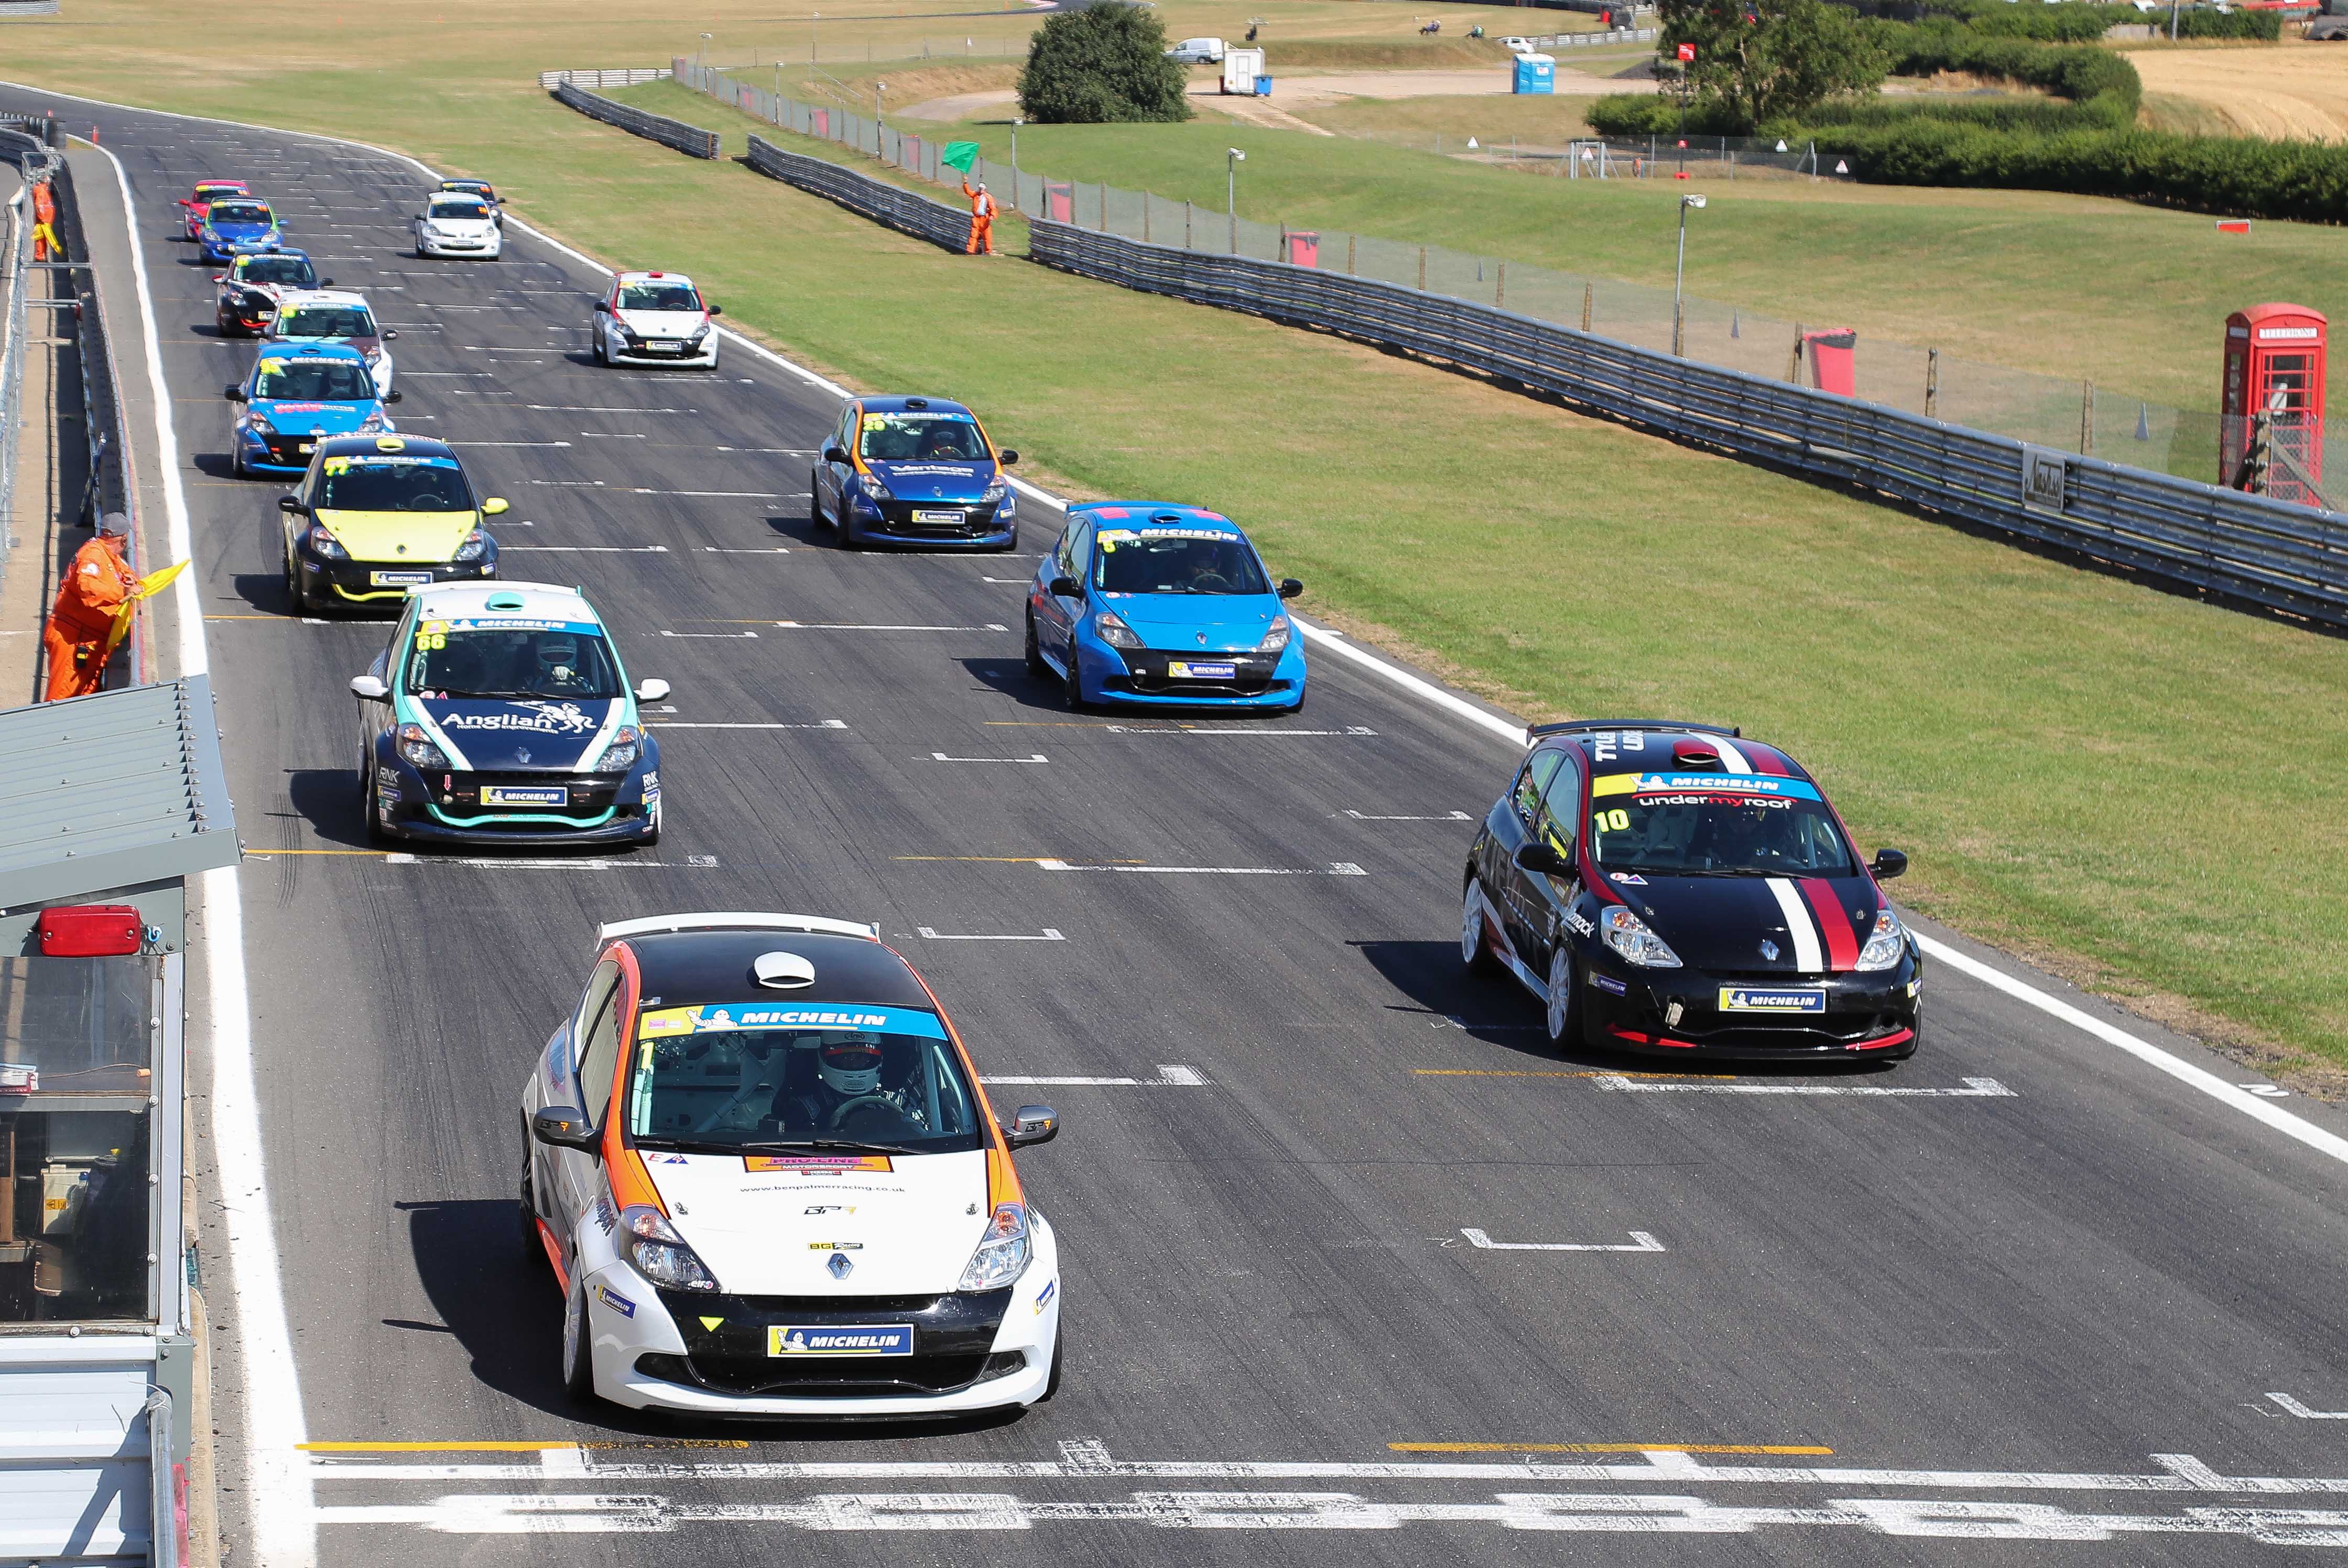 MICHELIN CLIO CUP SERIES SET FOR TRIPLE HEADER AT ANGLESEY